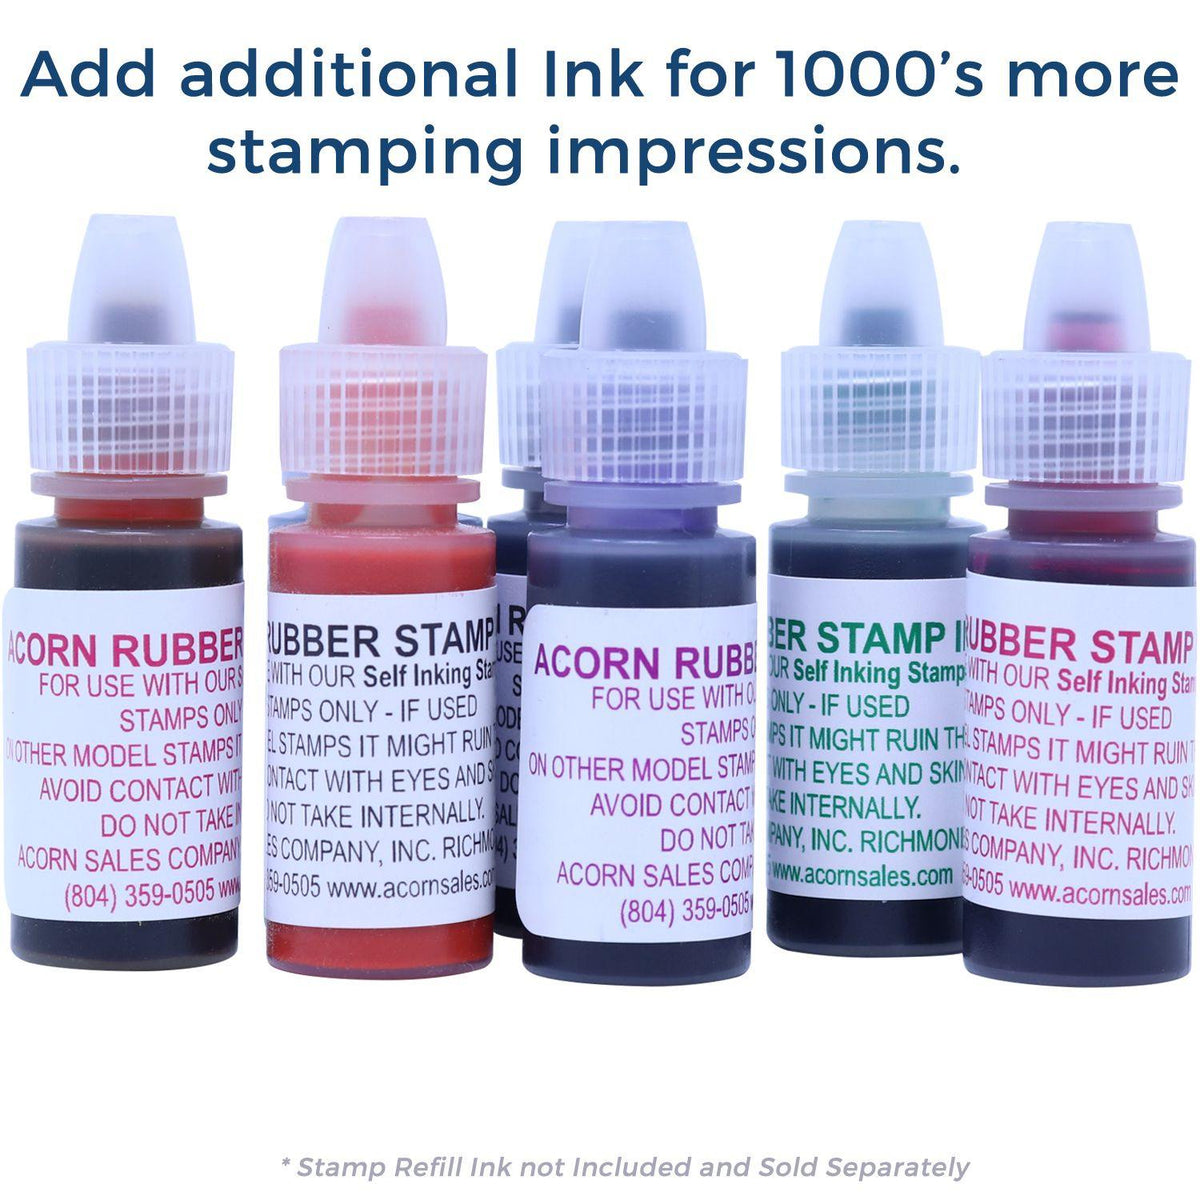 Slim Pre-Inked Aviso Stamp - Engineer Seal Stamps - Brand_Slim, Impression Size_Small, Stamp Type_Pre-Inked Stamp, Type of Use_Finance, Type of Use_Legal, Type of Use_Office